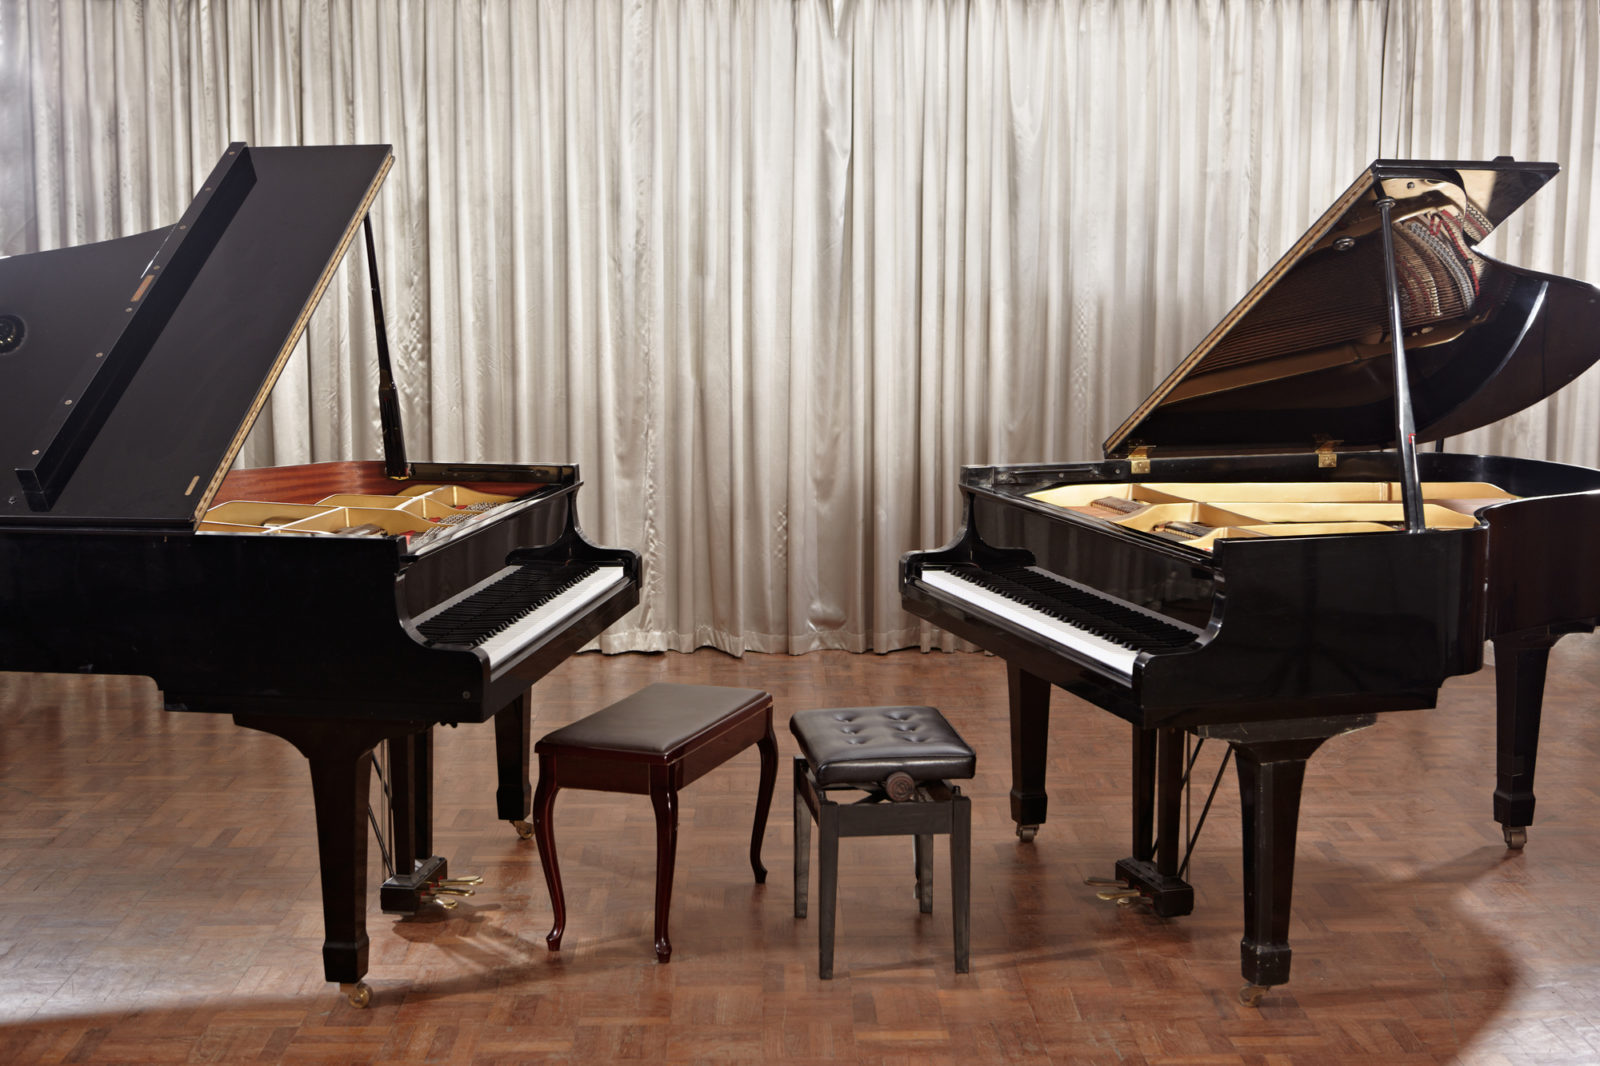 Dueling Pianos theme for events